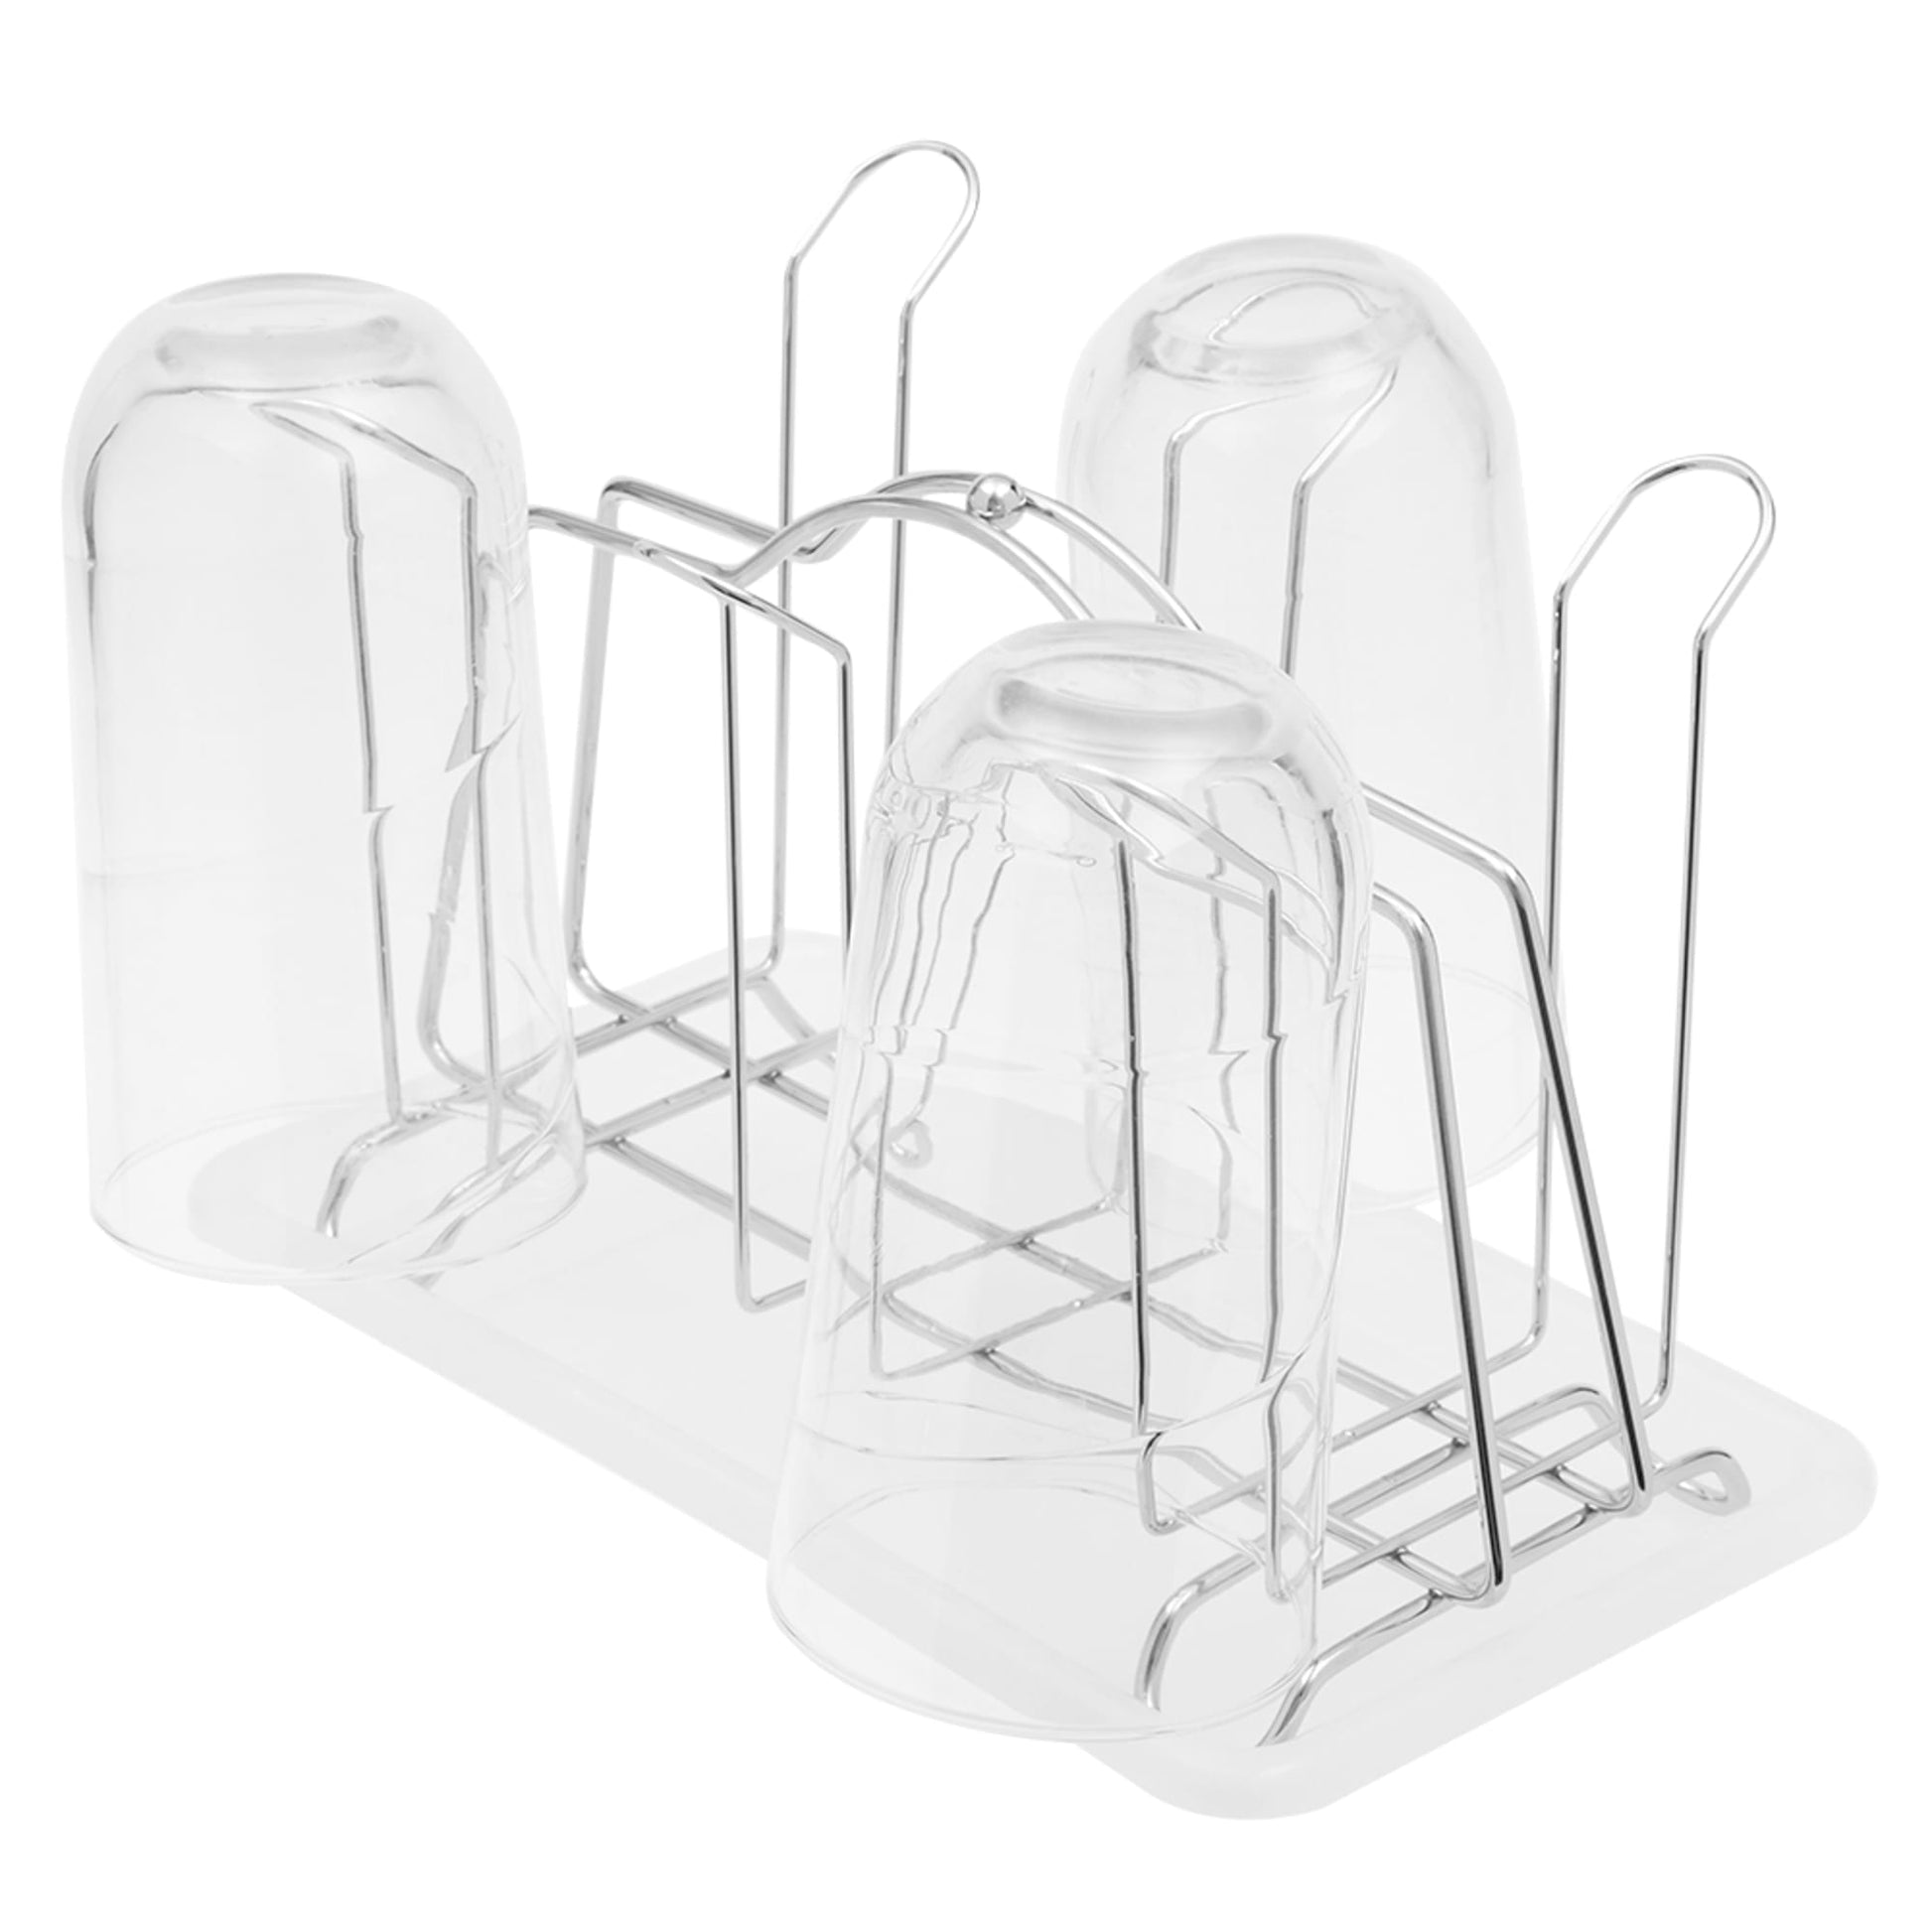 Drain Tray, Metal Organizer Wood Handle Cup Drying Rack Stand –